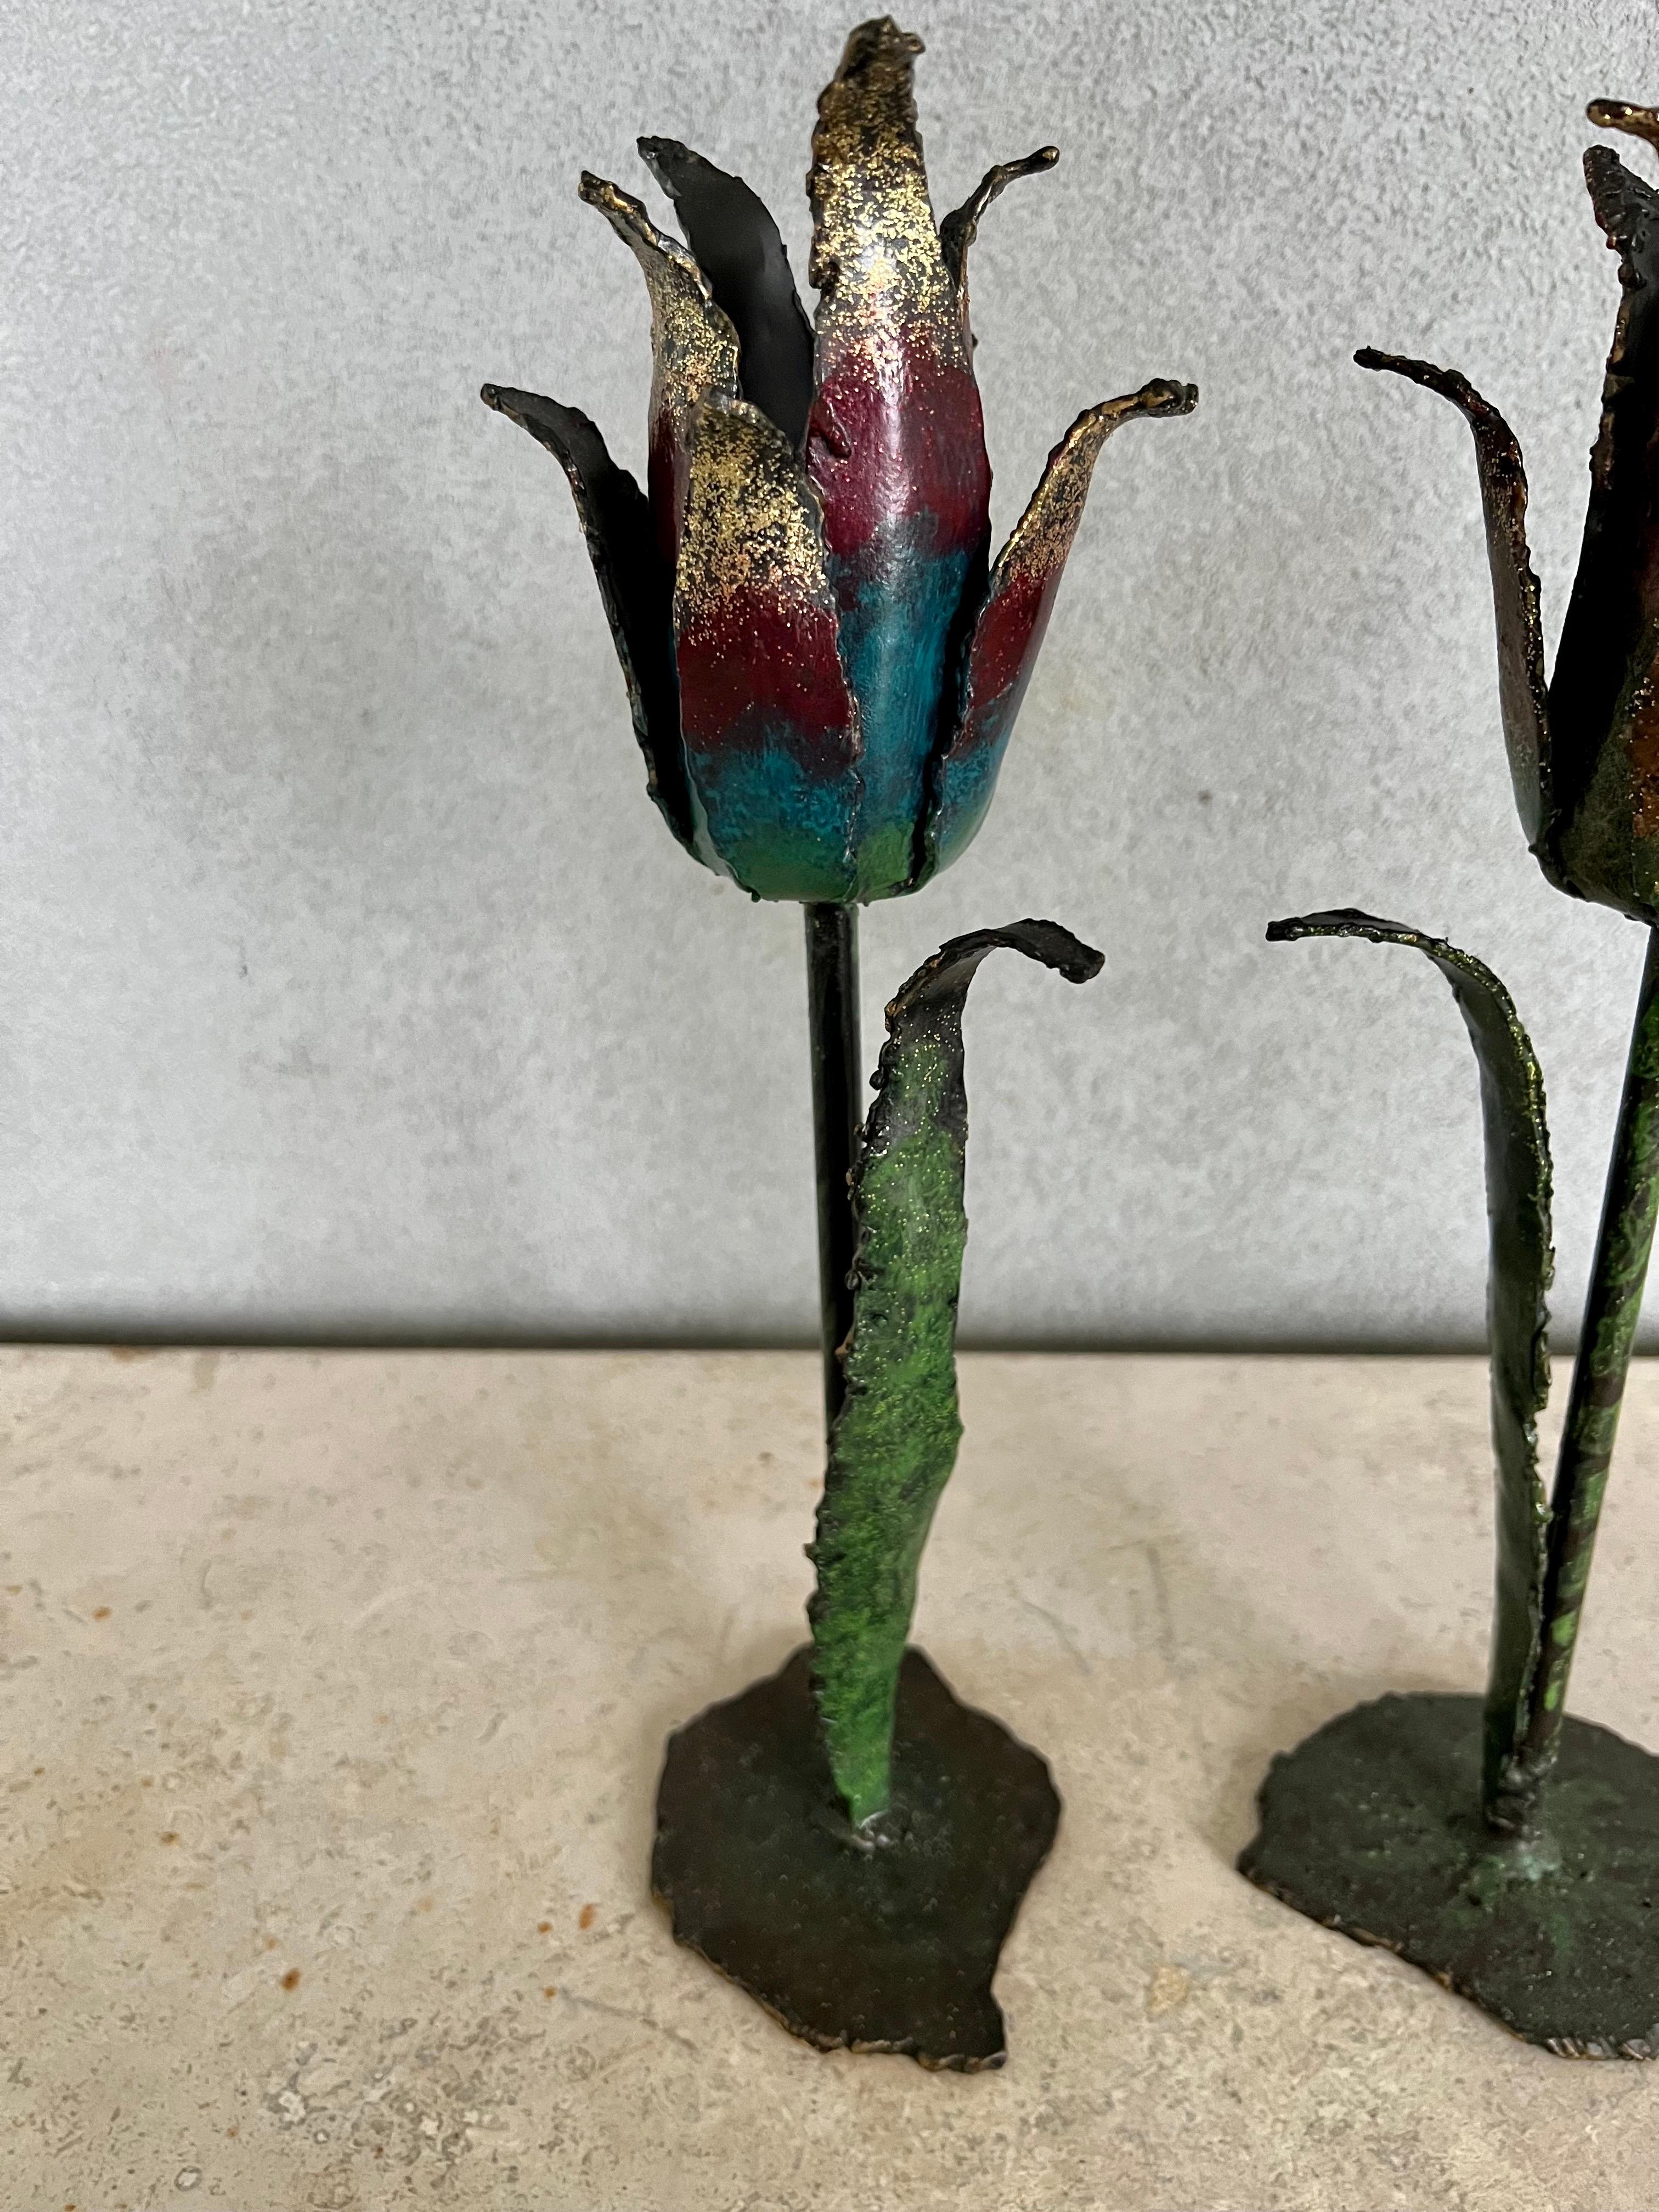 Beautifully crafted pair of hand-made iron tulip.
Candlesticks, hand painted with a shade of colors.
One of them has shades of oranges the other shades of blues, greens and puebles.
The irregular 4”x5” bases are also made of iron, both